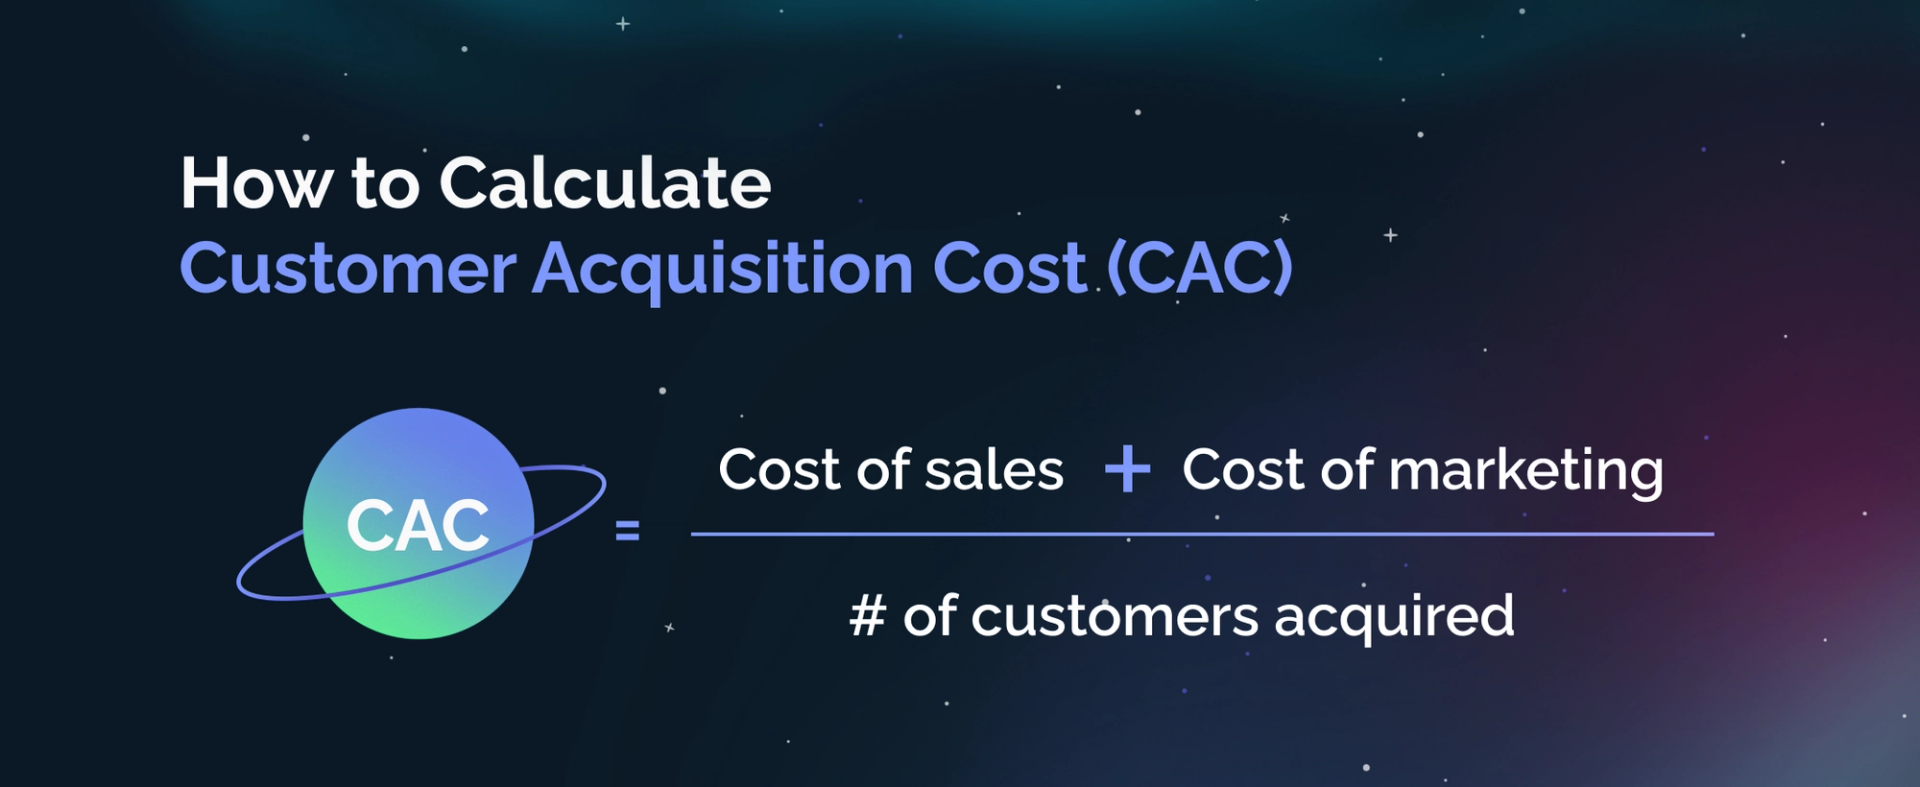 How to calculate CAC